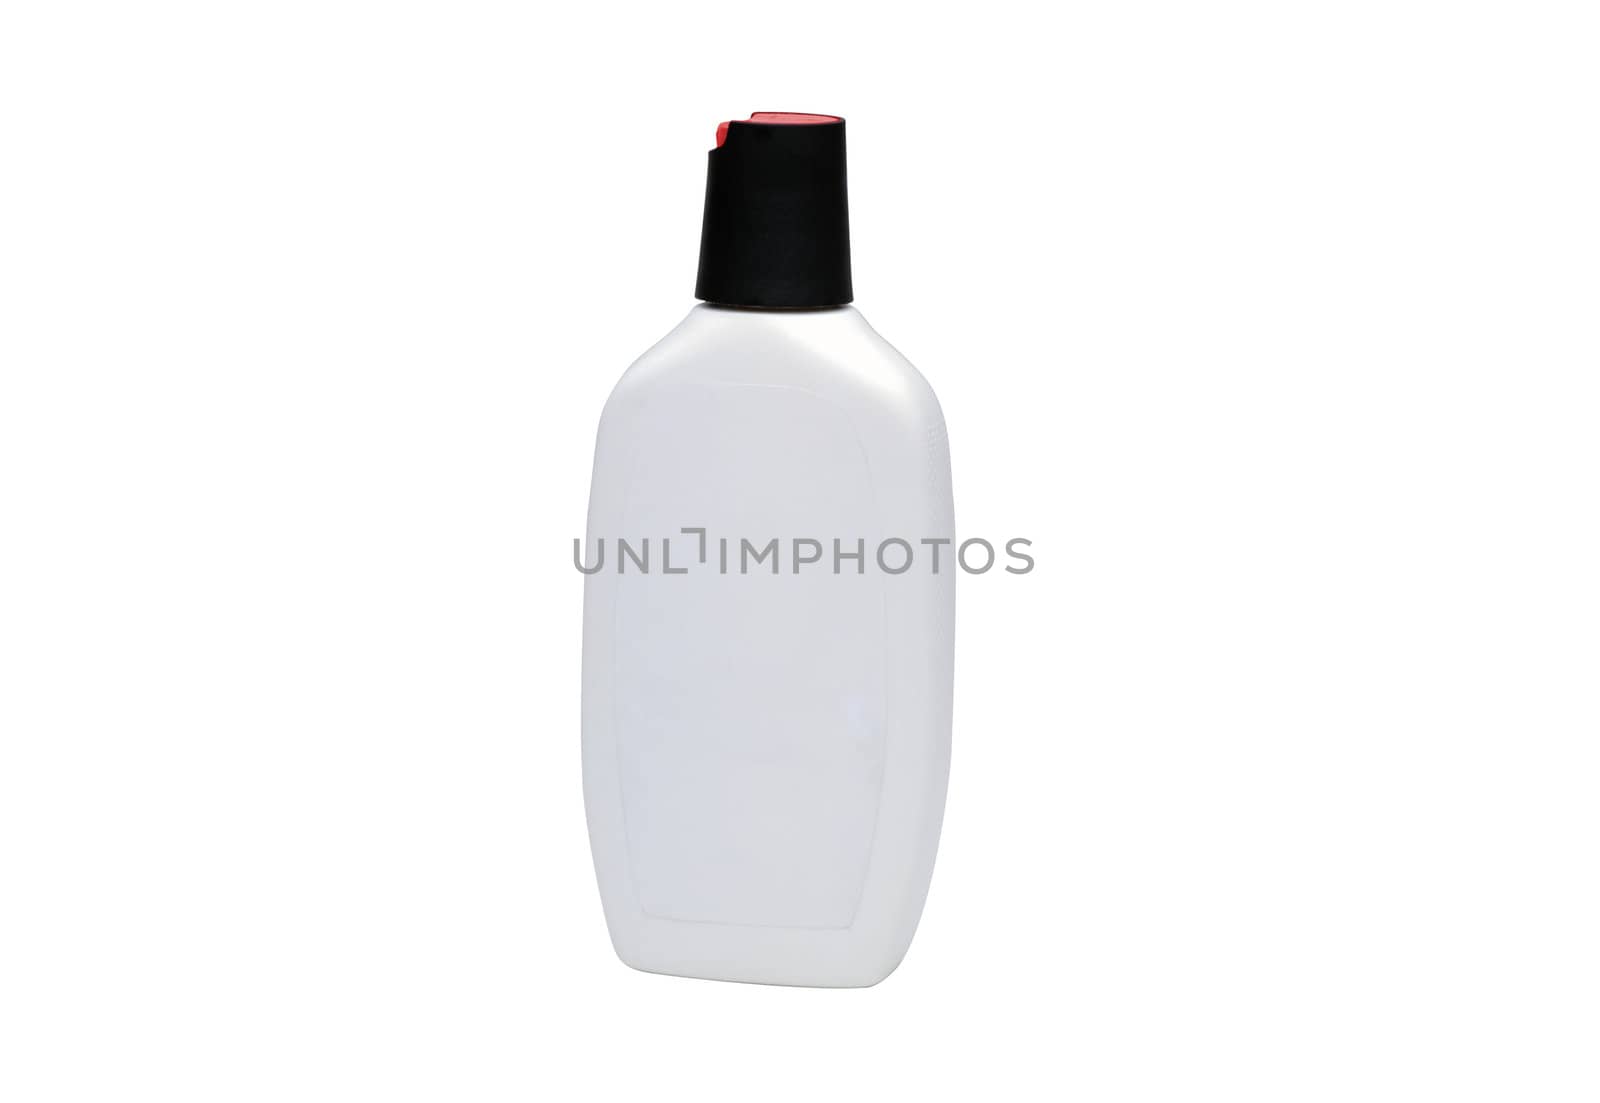 Shampoo bottle on the white backgrounds for you